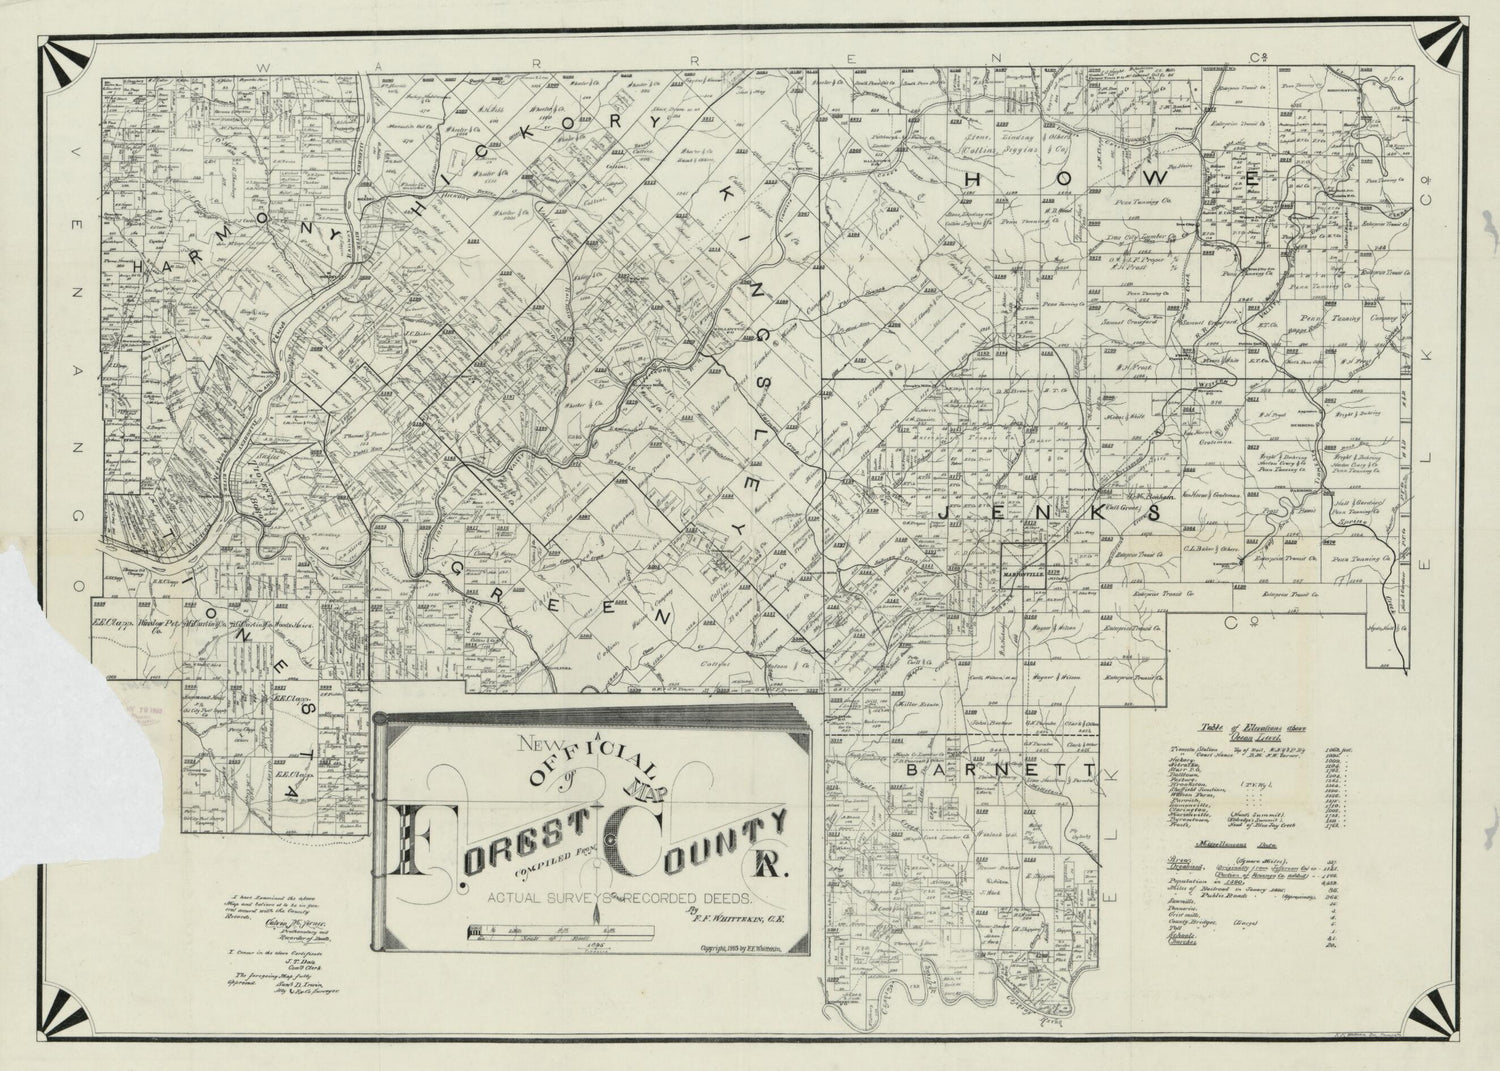 This old map of New Official Map of Forest County, Pennsylvania from 1895 was created by  Forest County (Pa.), F. F. Whittekin in 1895